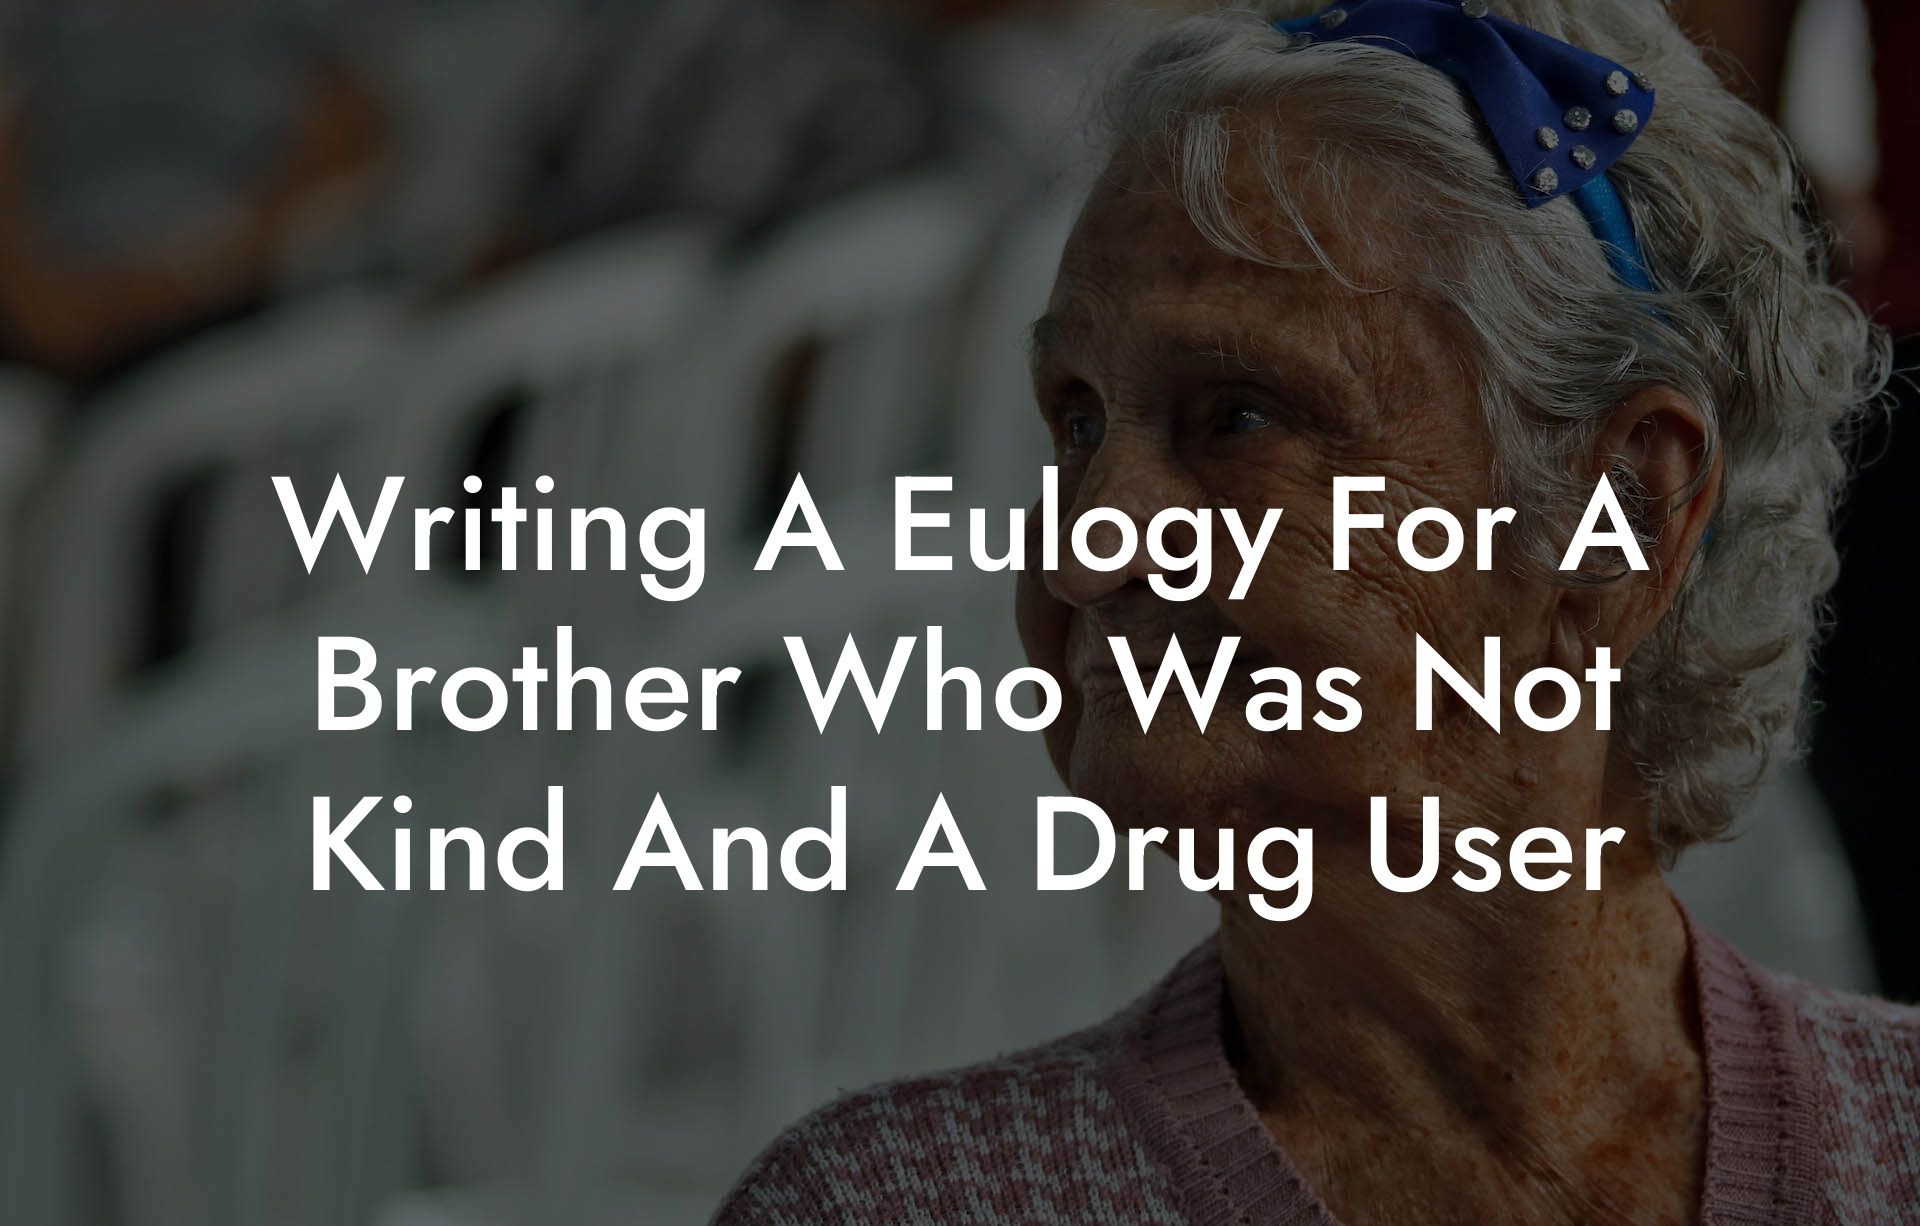 Writing A Eulogy For A Brother Who Was Not Kind And A Drug User